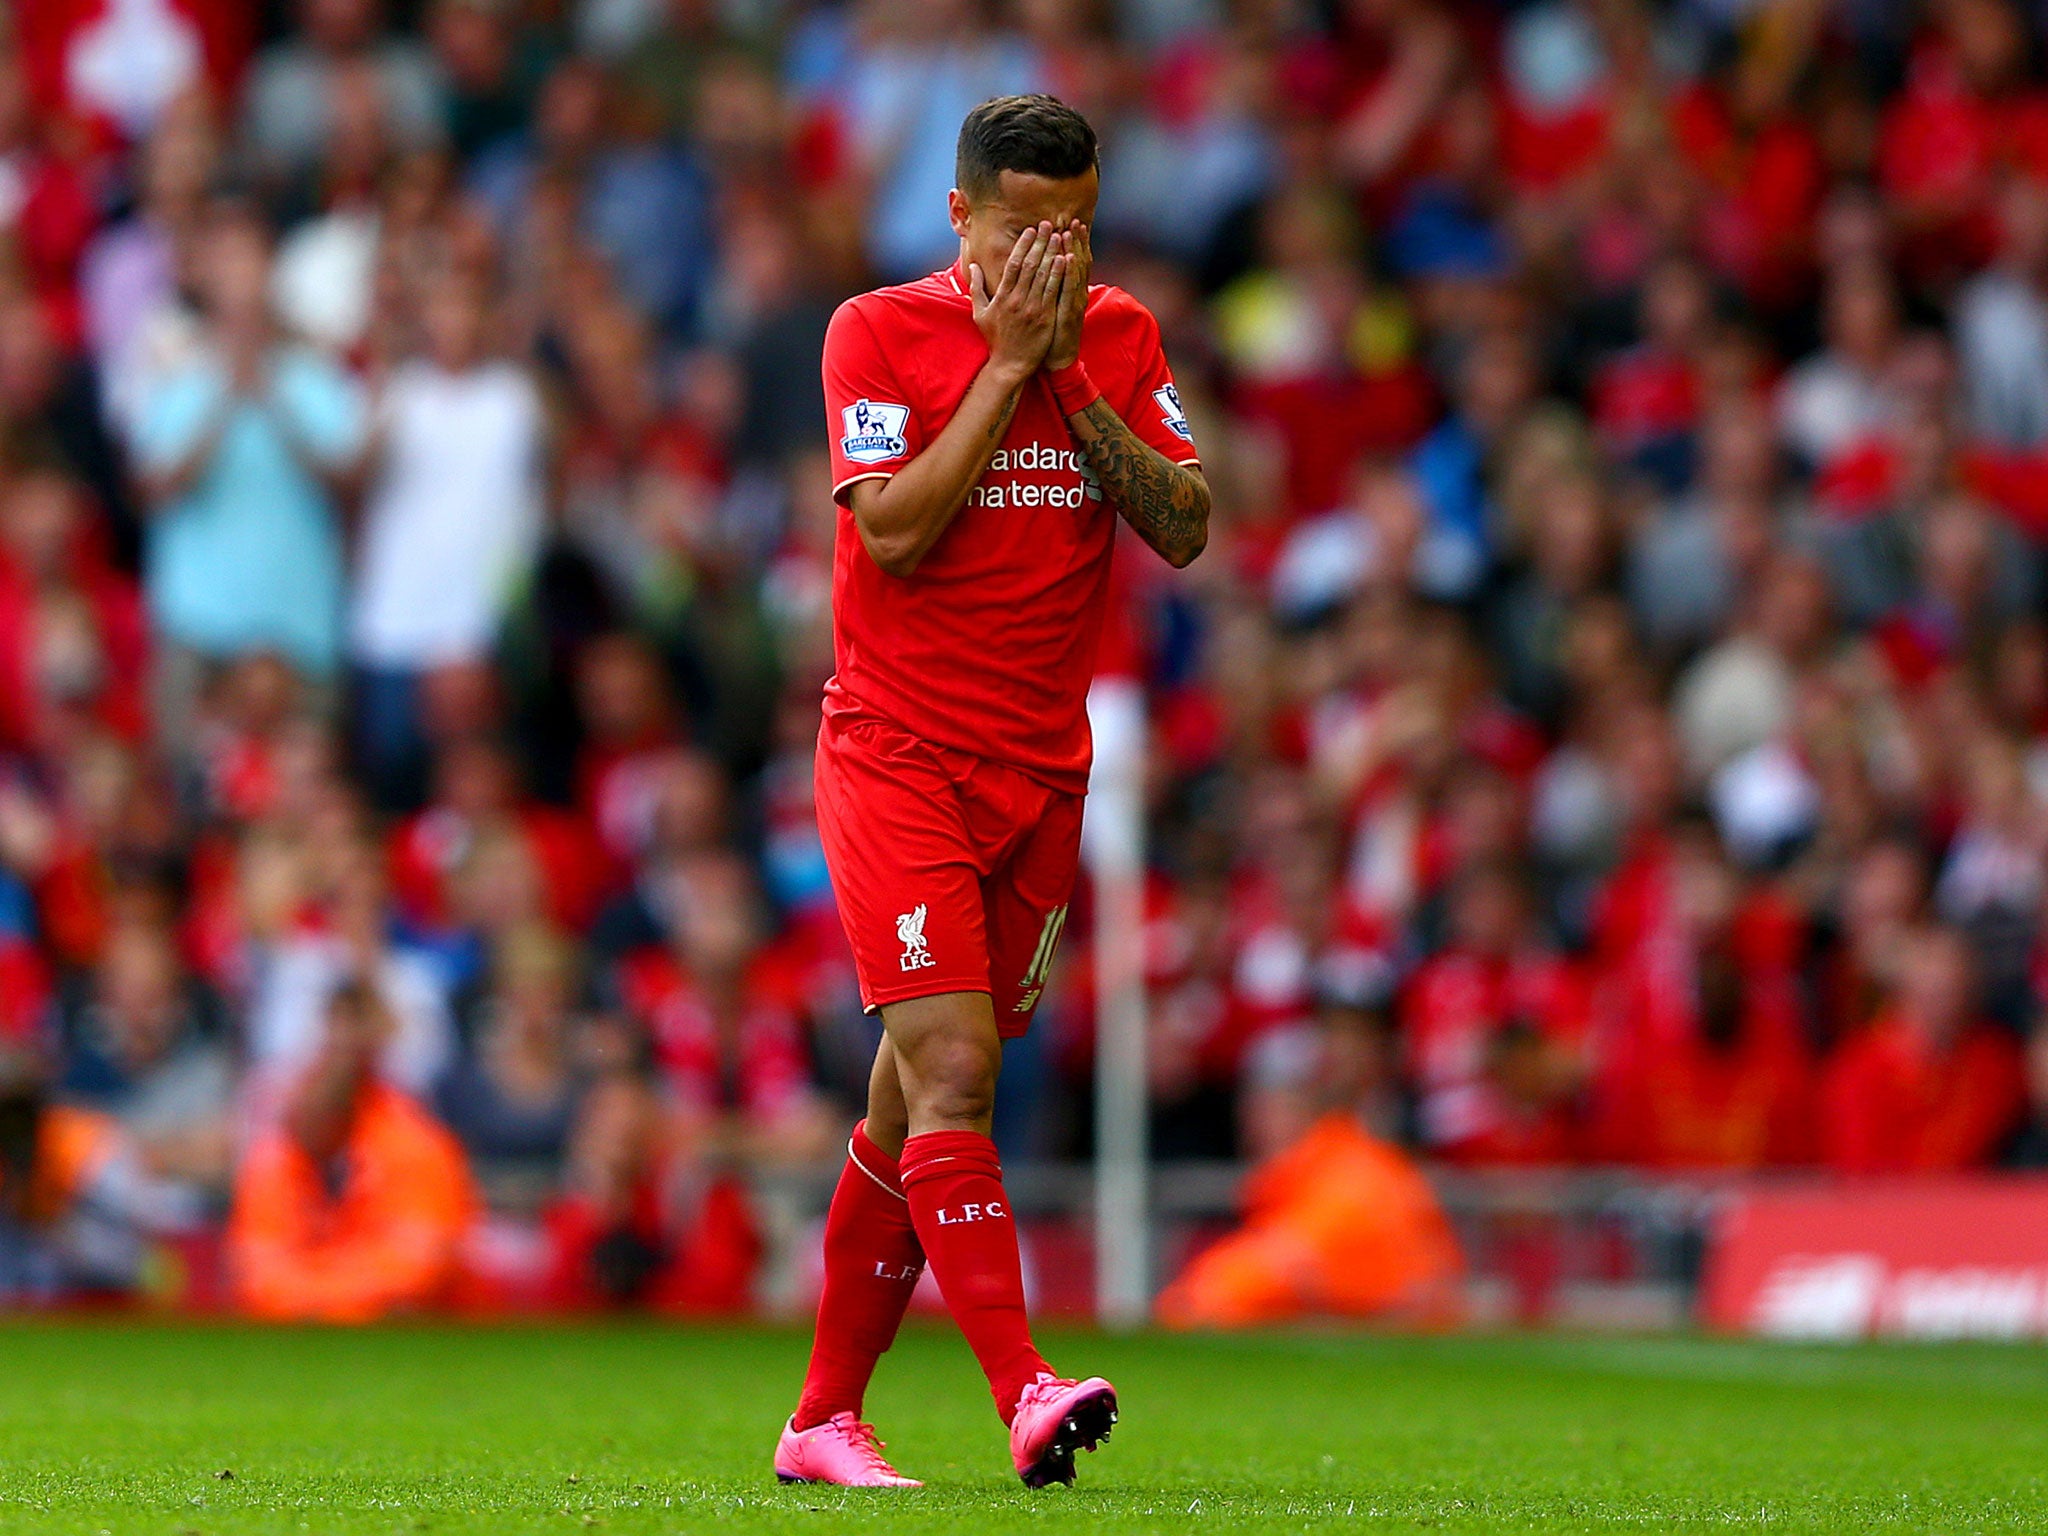 Philippe Coutinho dejectedly walks off after being shown a red card